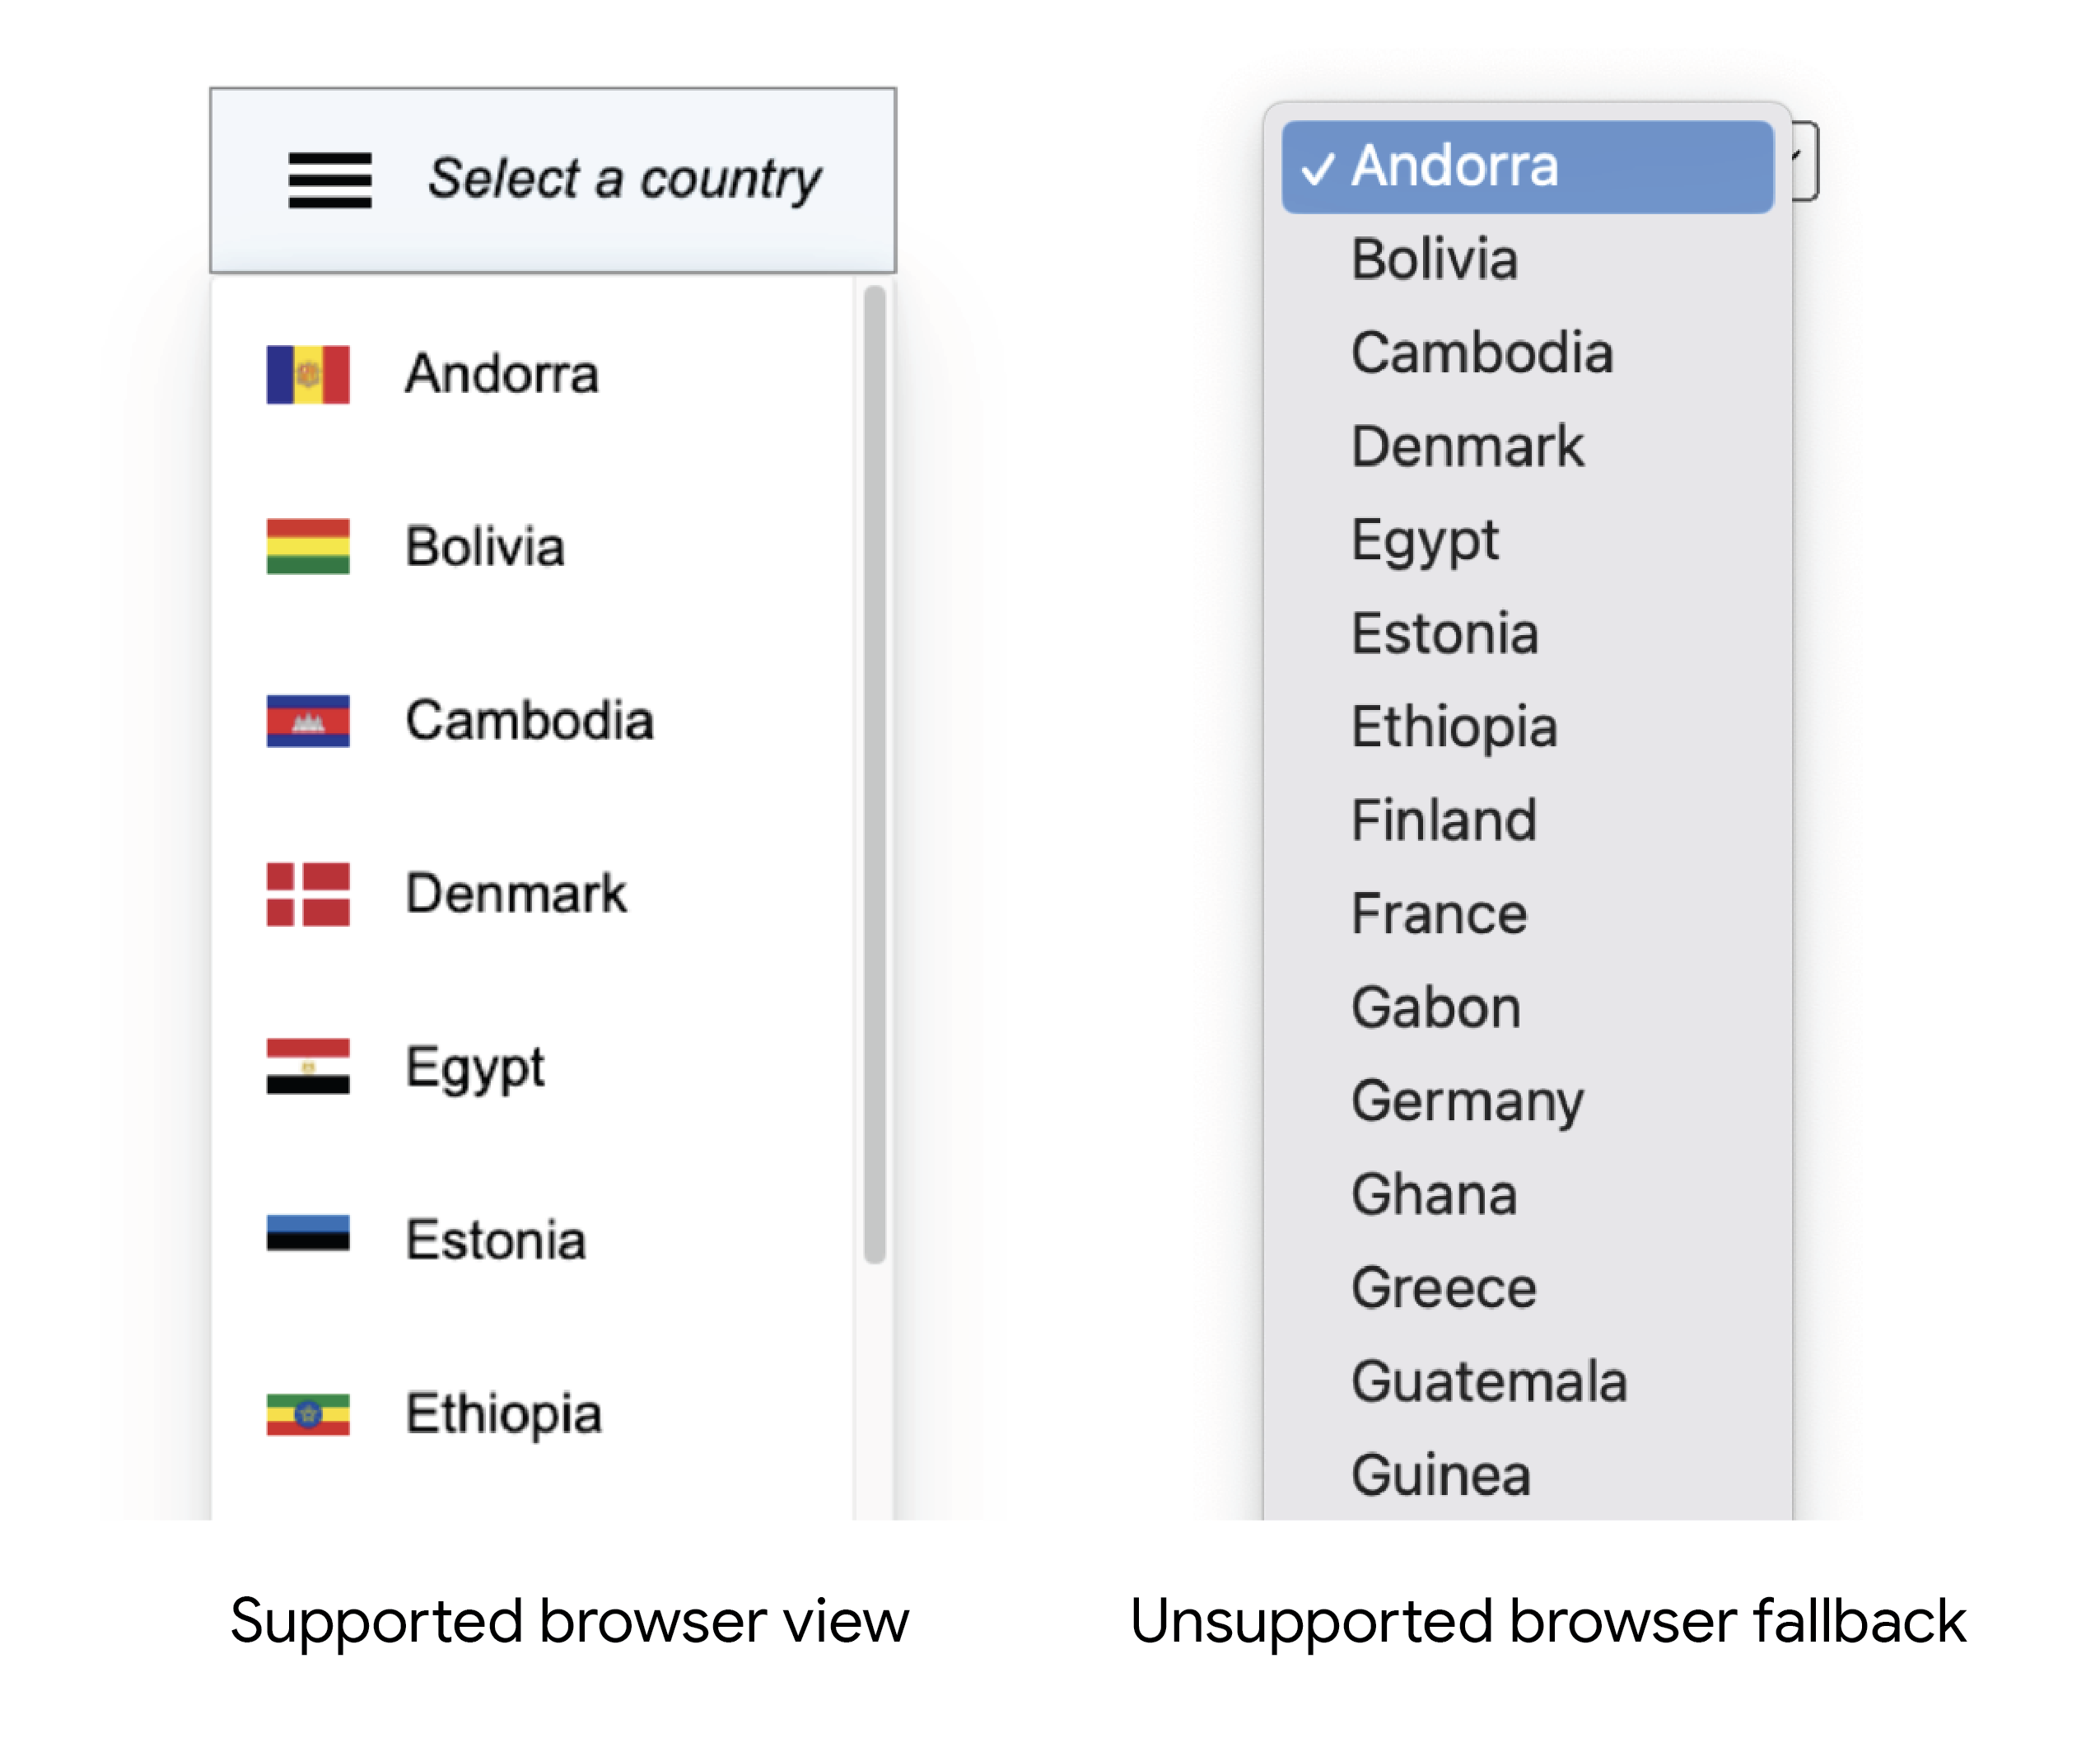 Unsupported browser gets current select experience.